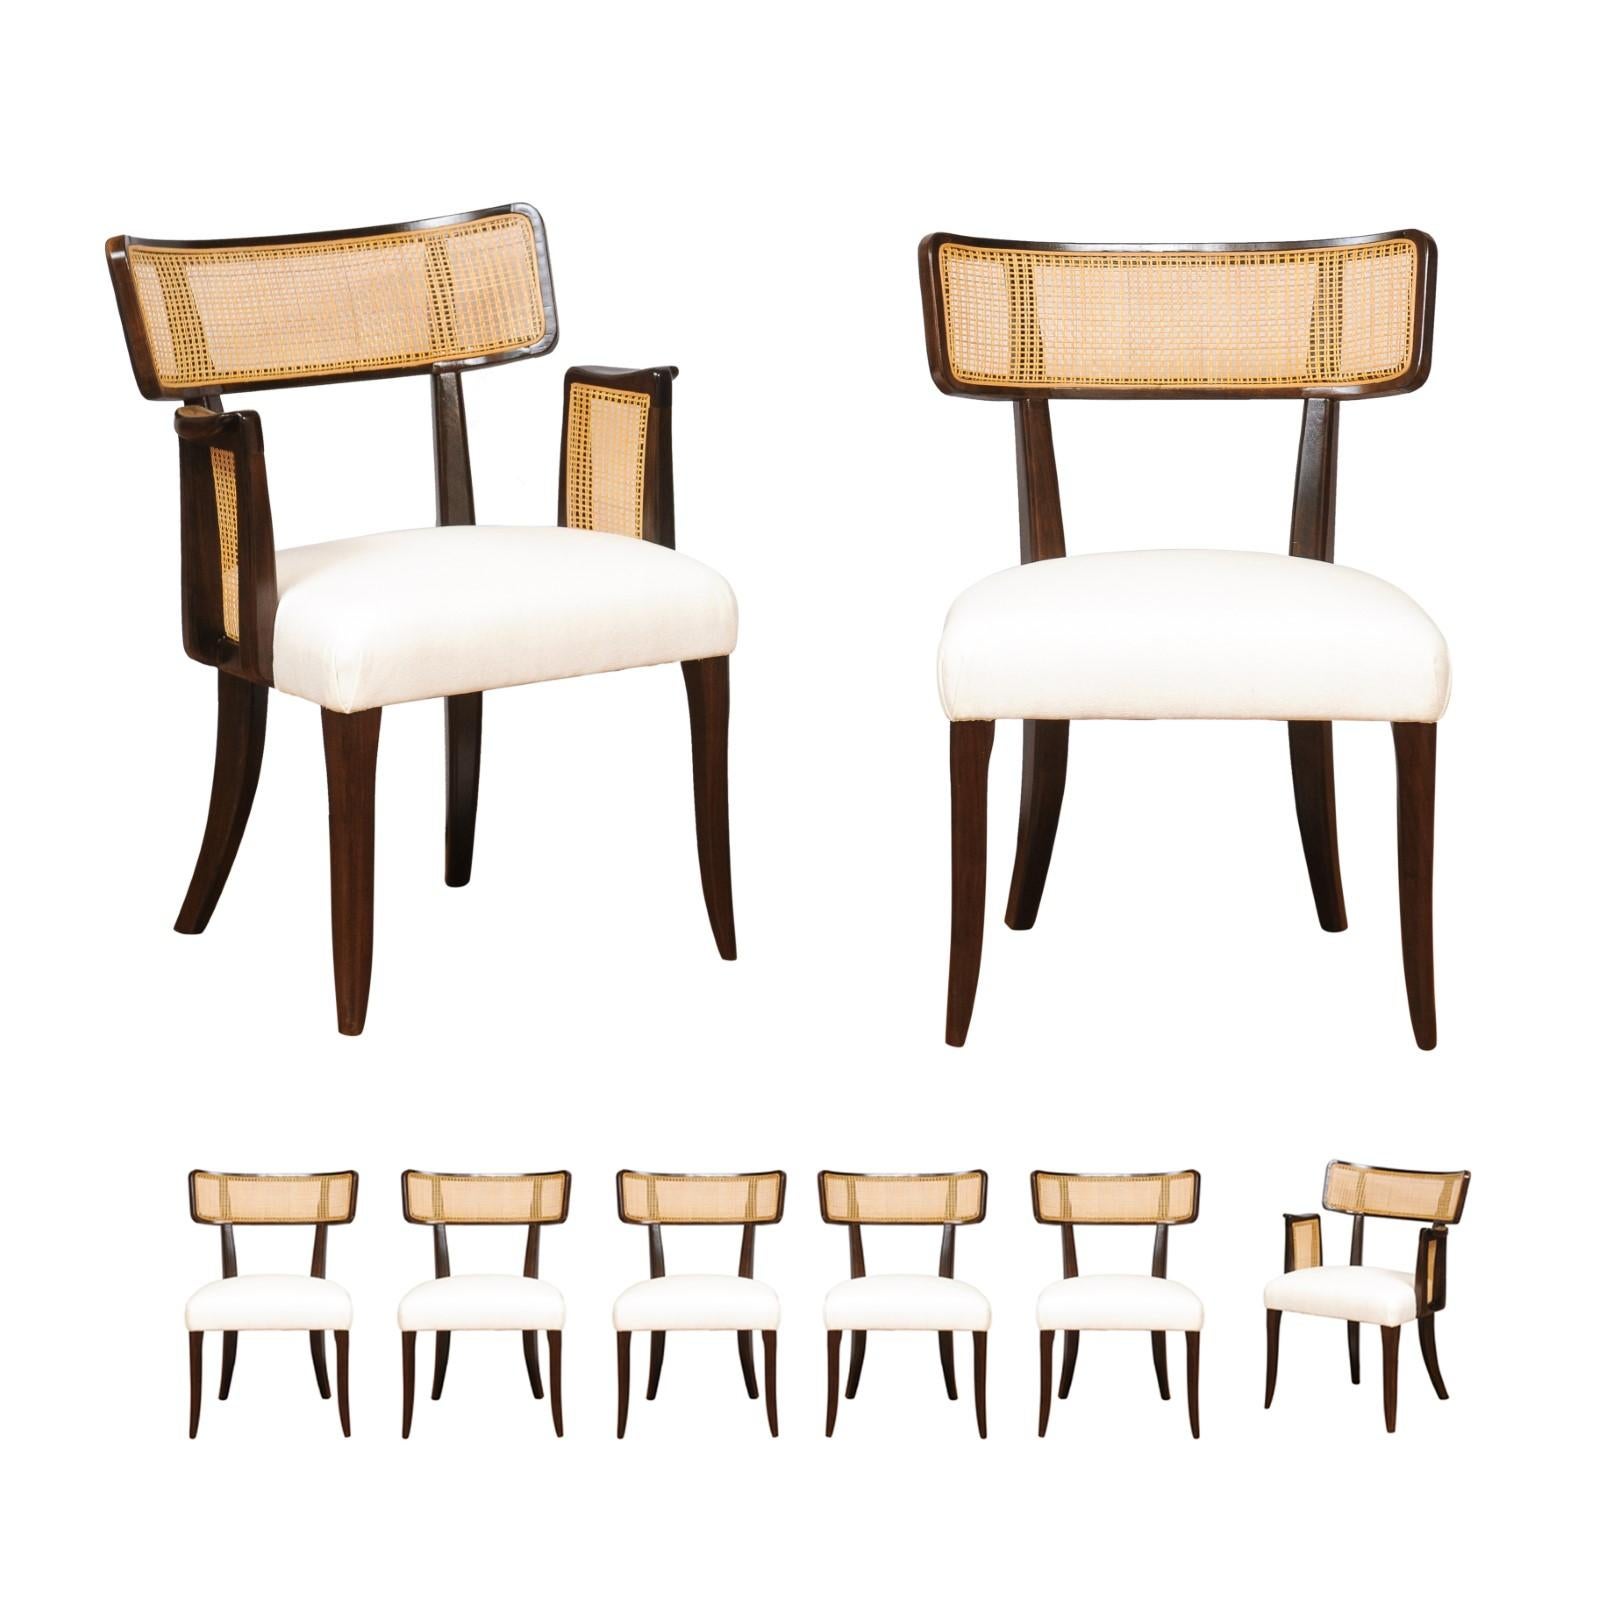 Gorgeous Restored Set of 8 Cane Dining Chairs by Wormley for Dunbar, circa 1948 For Sale 13